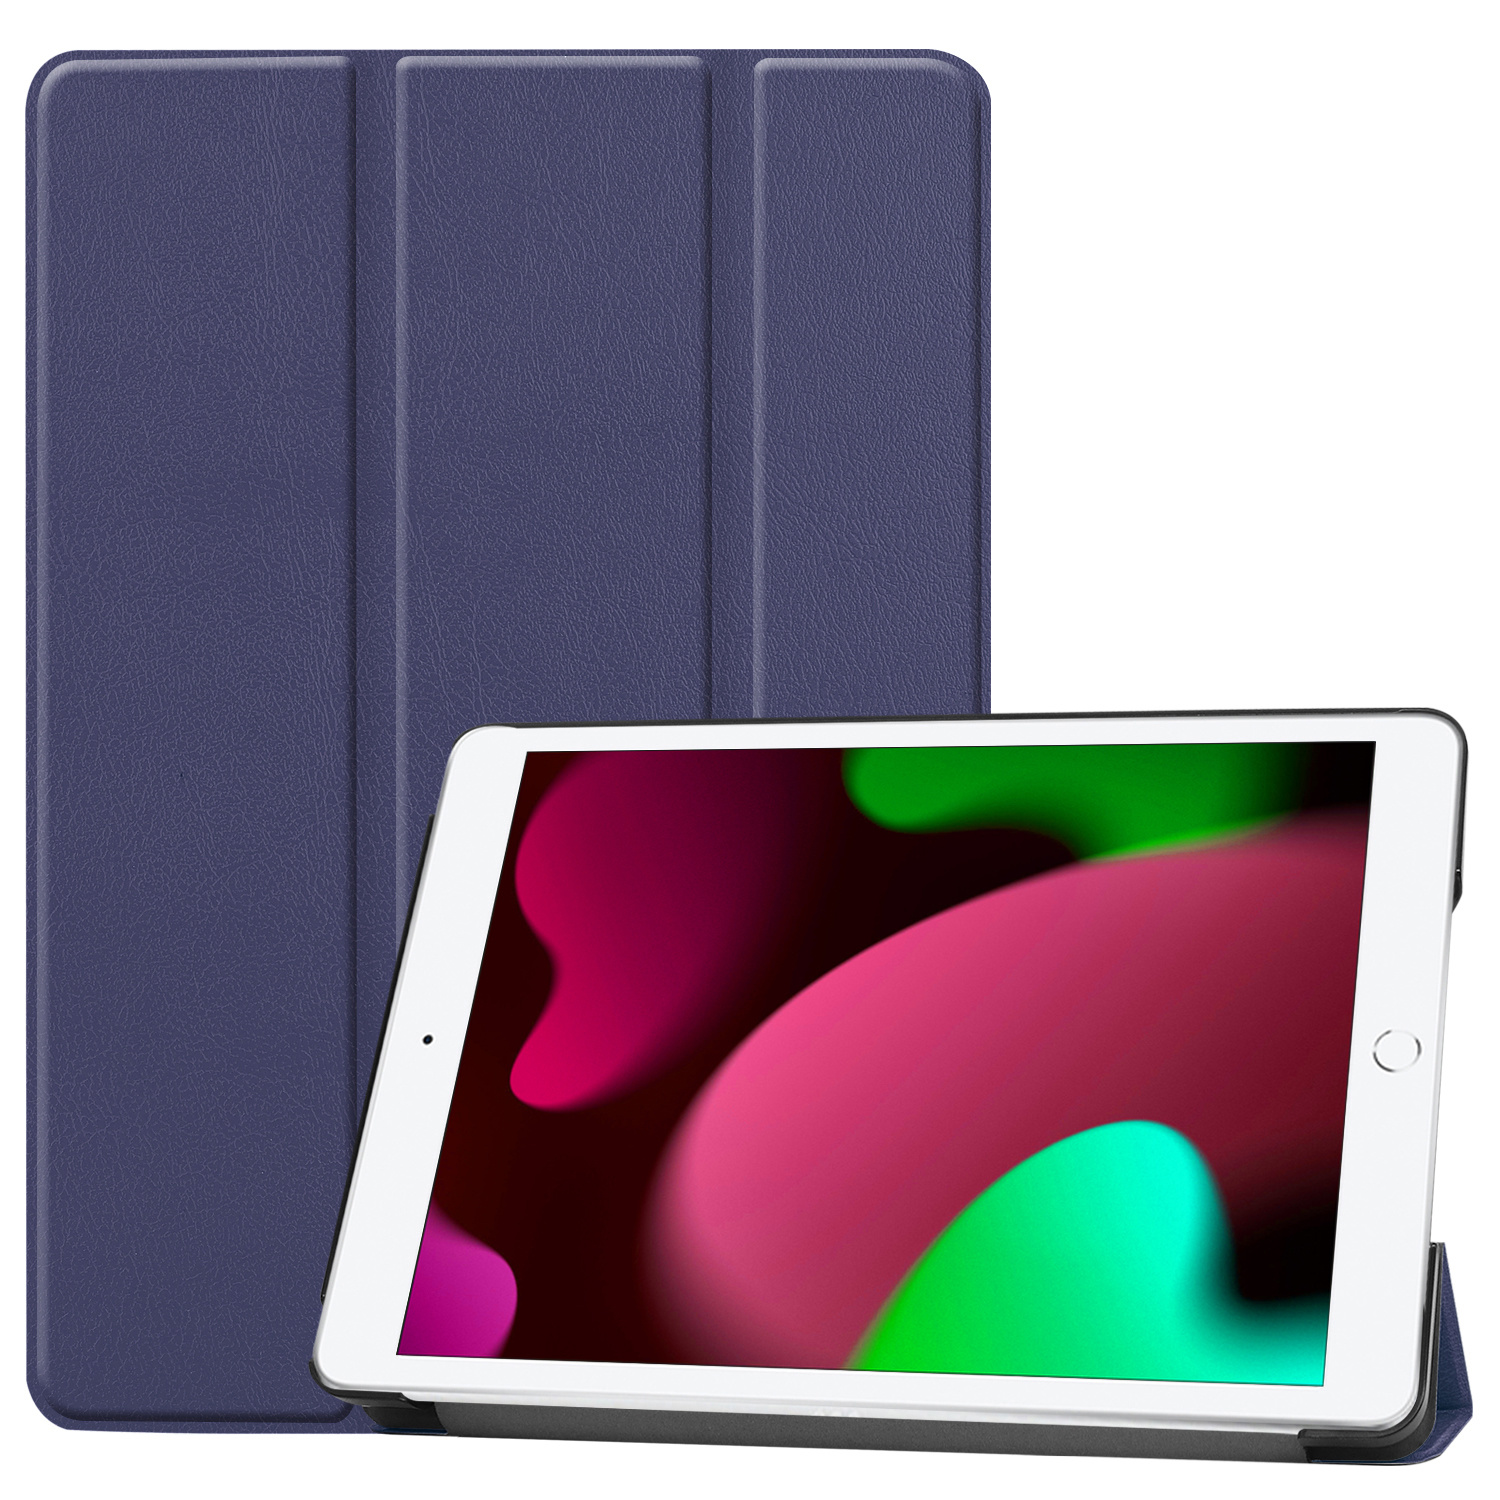 Nomfy iPad 10.2 2020 Hoesje Book Case Hoes - iPad 10.2 2020 Hoes Hardcover Case Hoesje - Donker Blauw